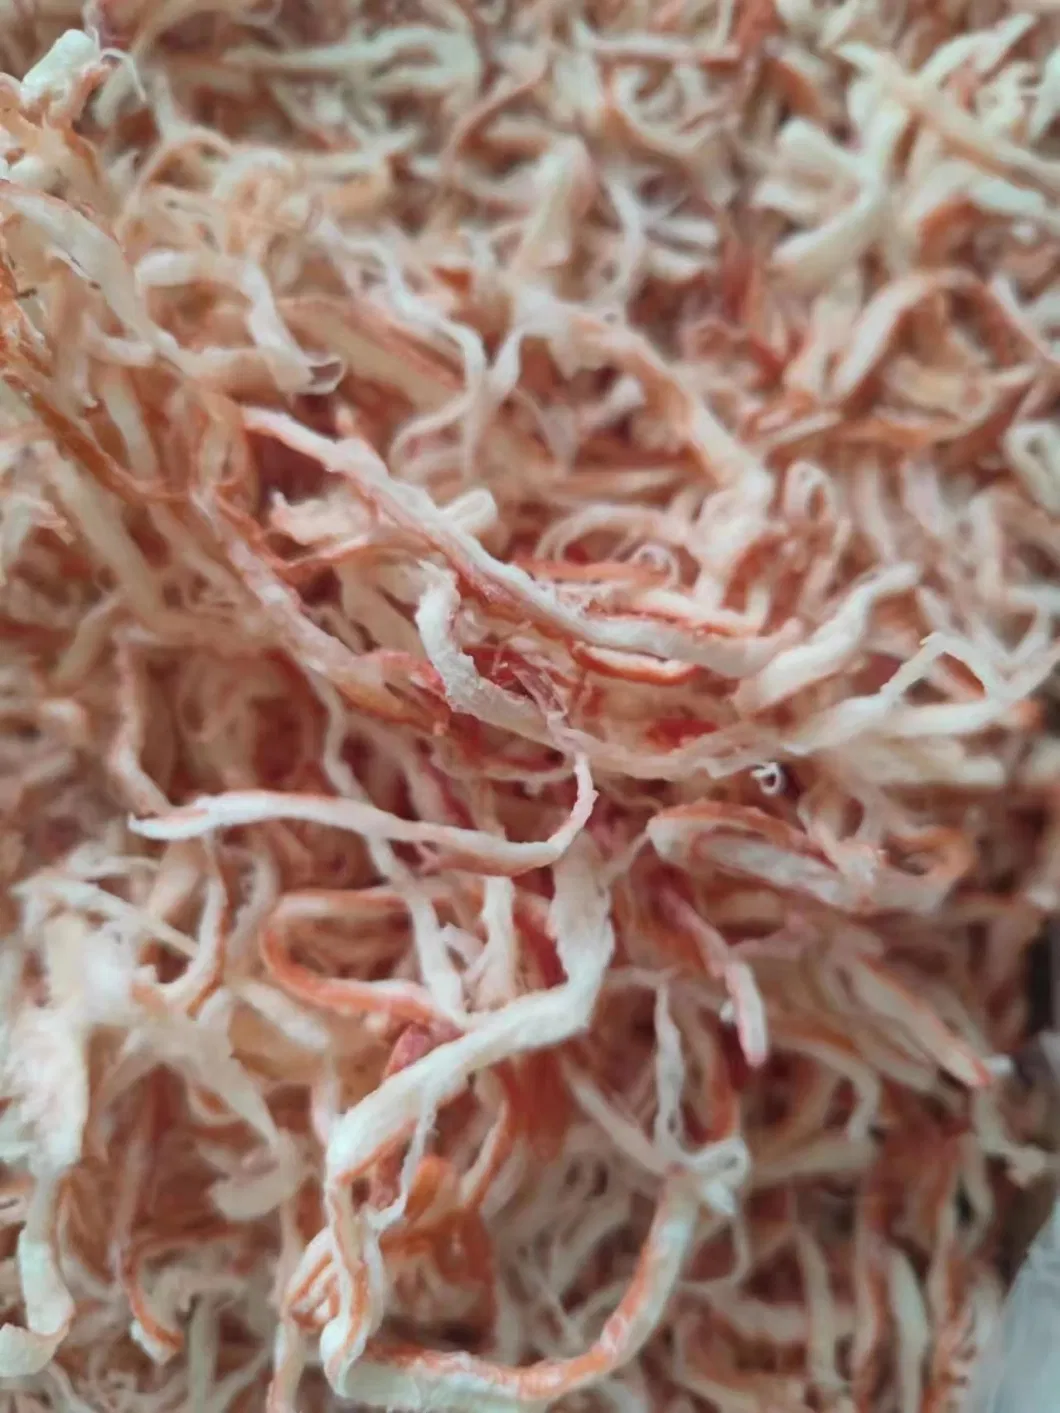 Frozen Seafood Delicious Dried Shredded Squid/Calamari